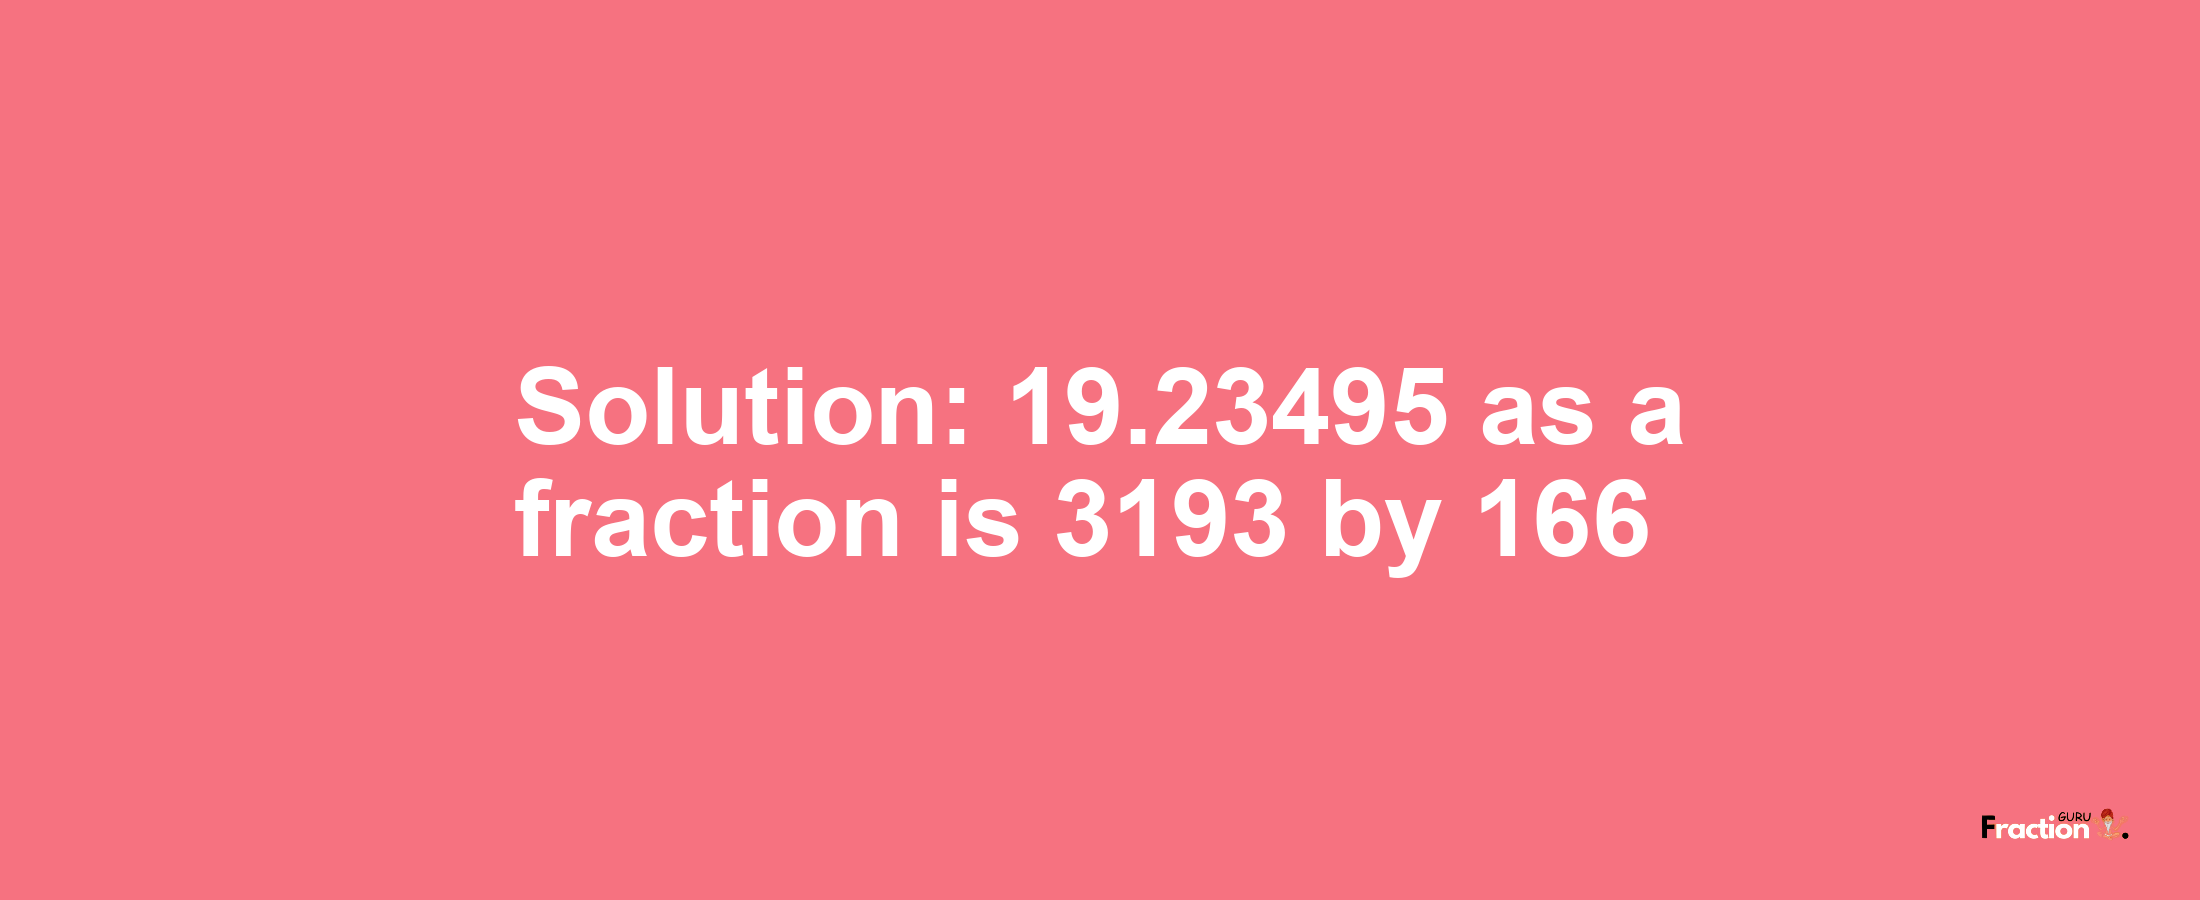 Solution:19.23495 as a fraction is 3193/166